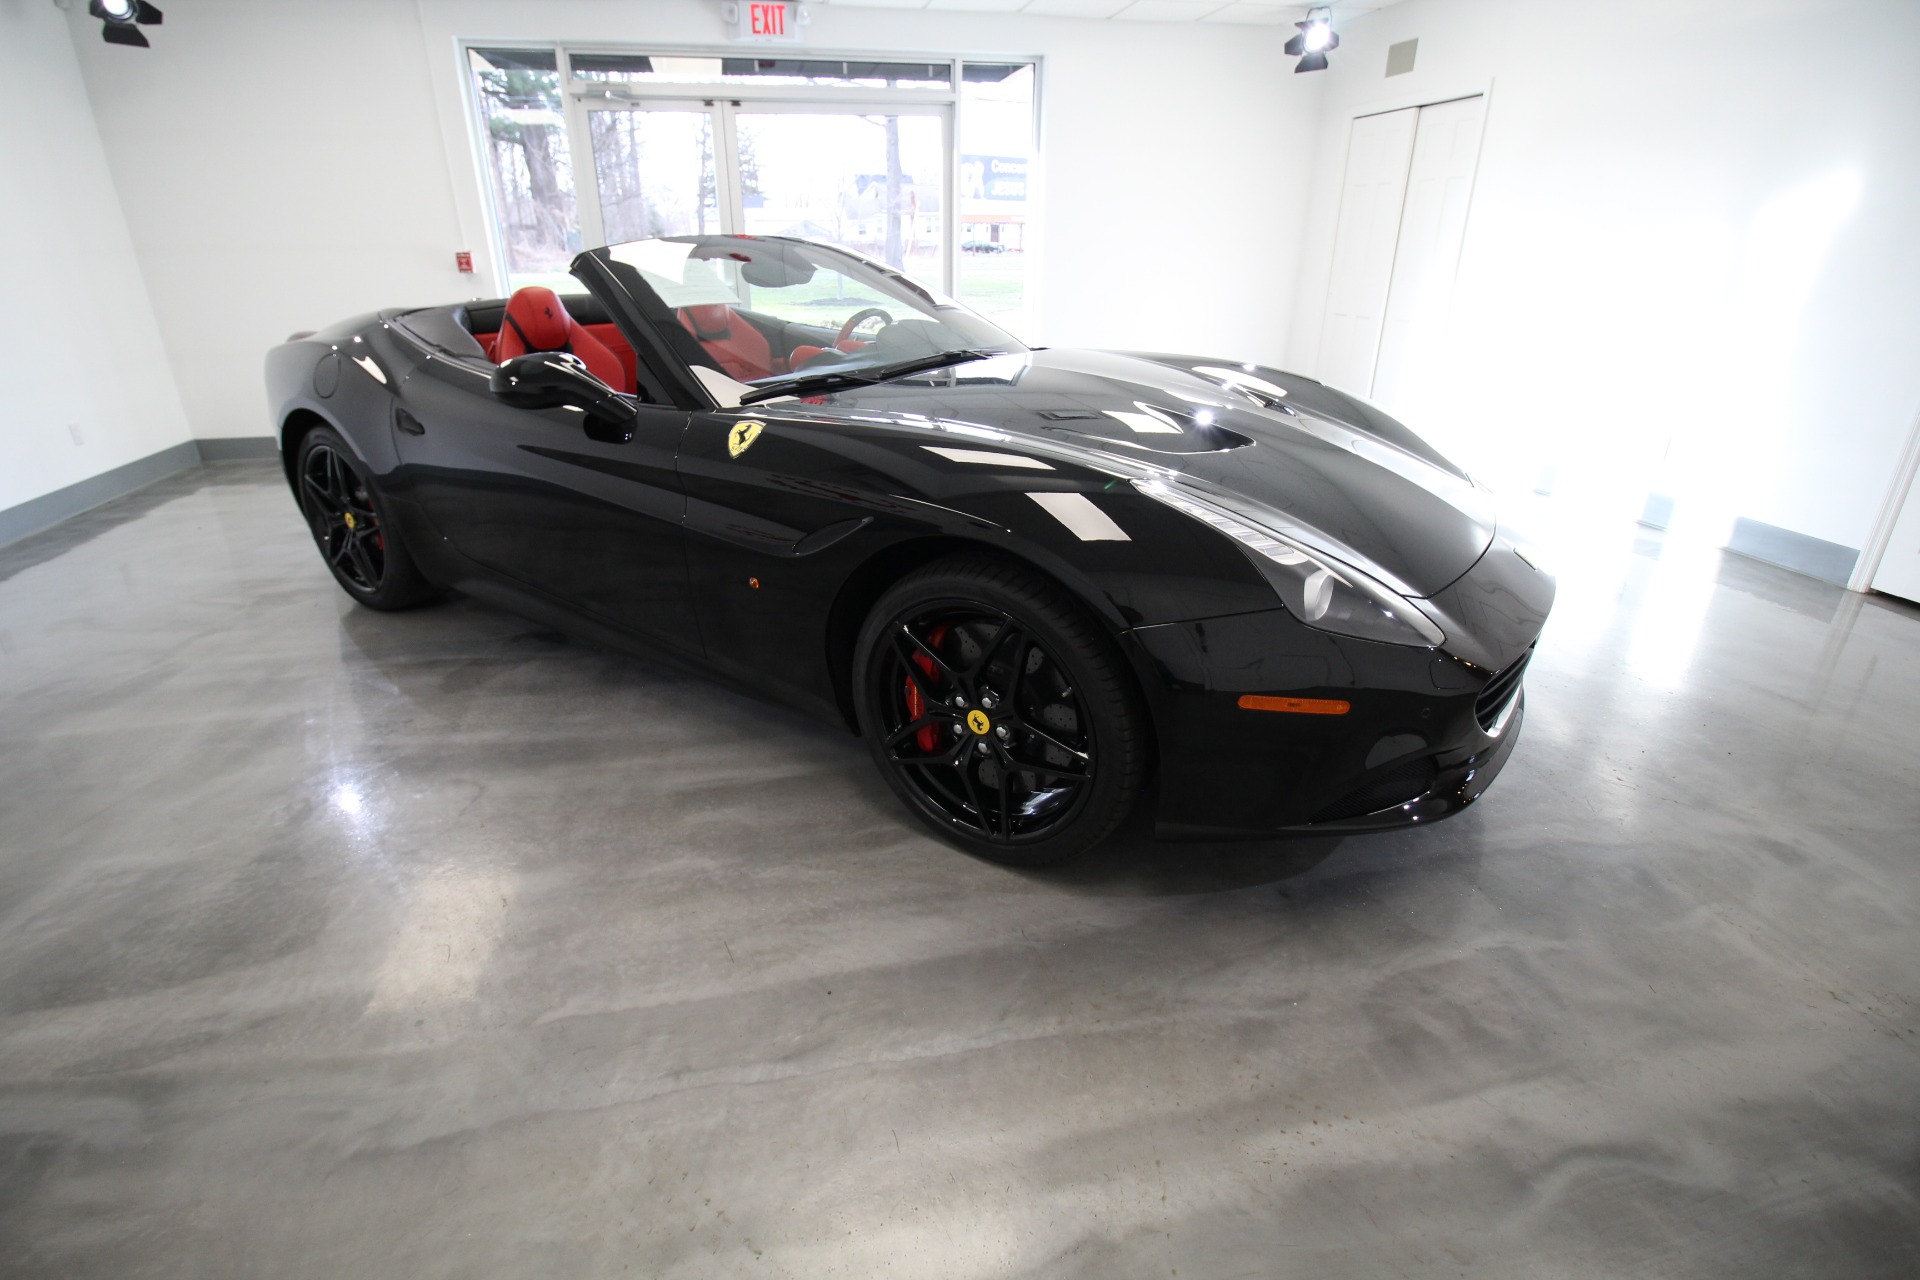 Used 2016 Black Ferrari California Convertible T RARE COLOR COMBO VERY WELL OPTIONED LOW MILES | Albany, NY